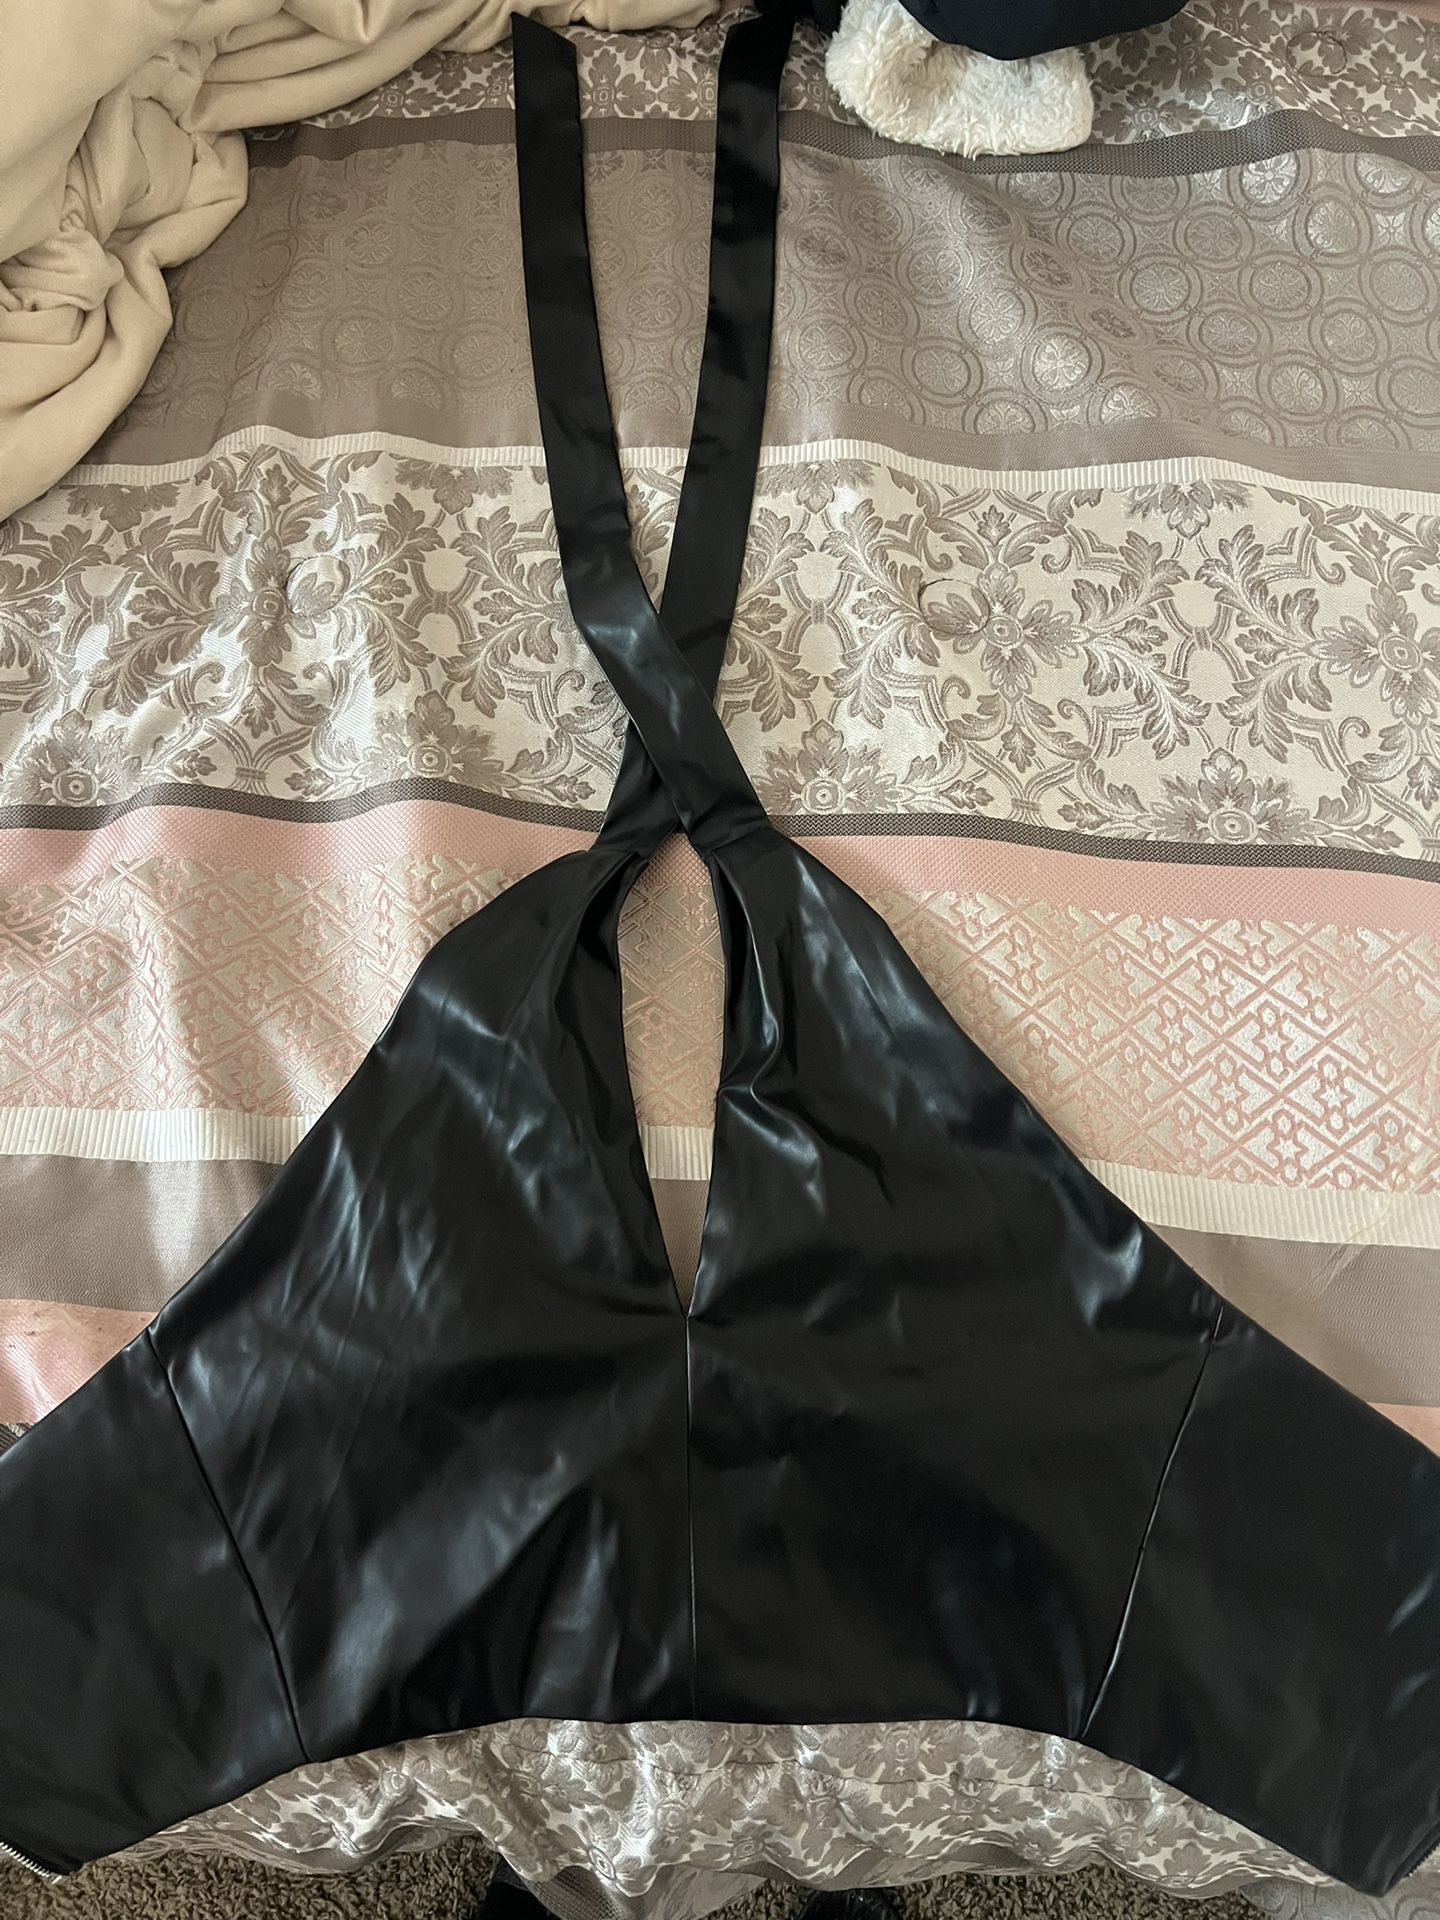 Leather halter top